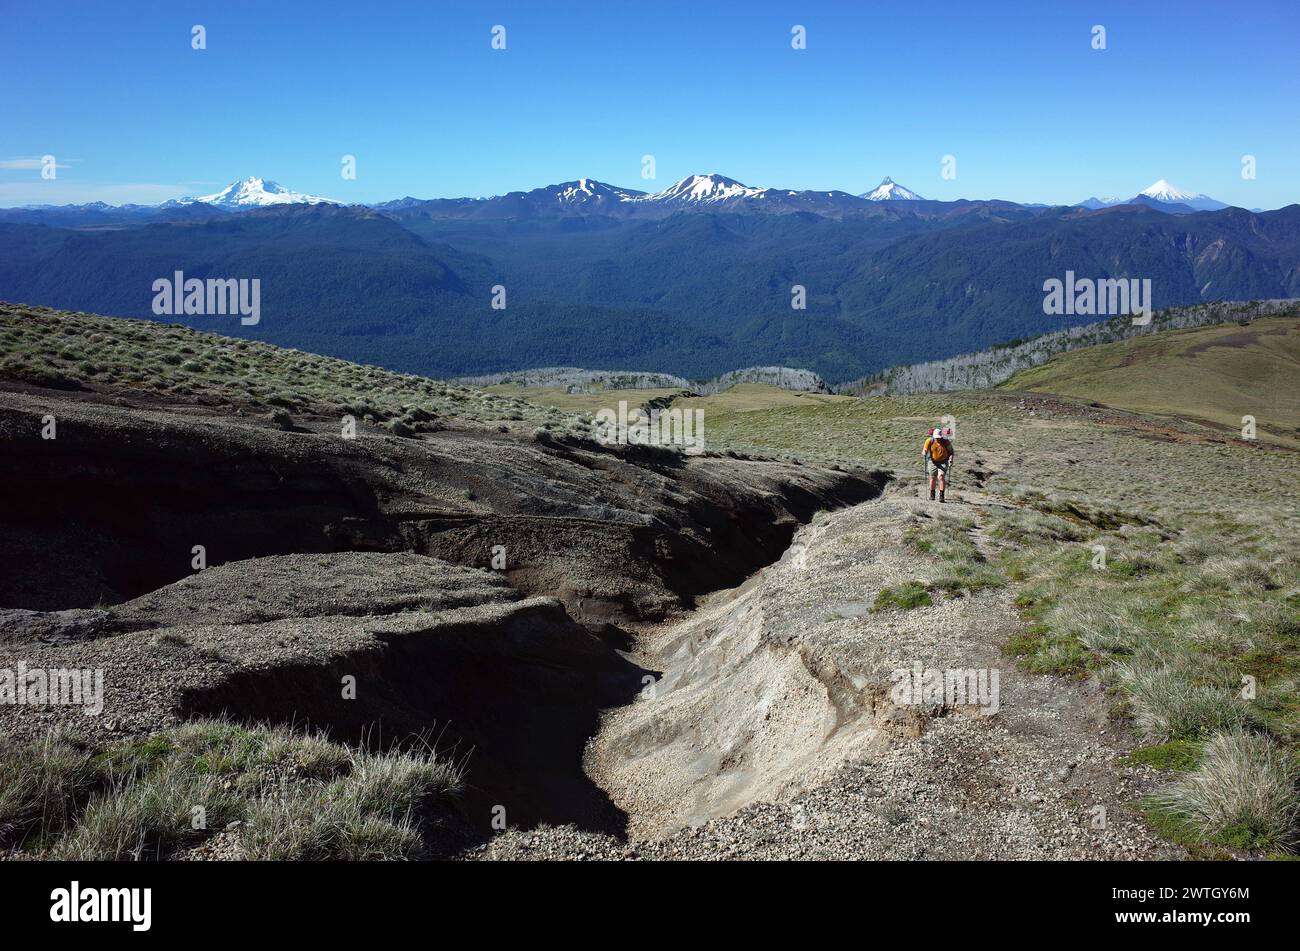 Hiking in Patagonia, Man solo walking up mountainside of volcano Puyehue in Puyehue National Park, Los Lagos Region, Chile. Volcanoes Tronador, Antill Stock Photo